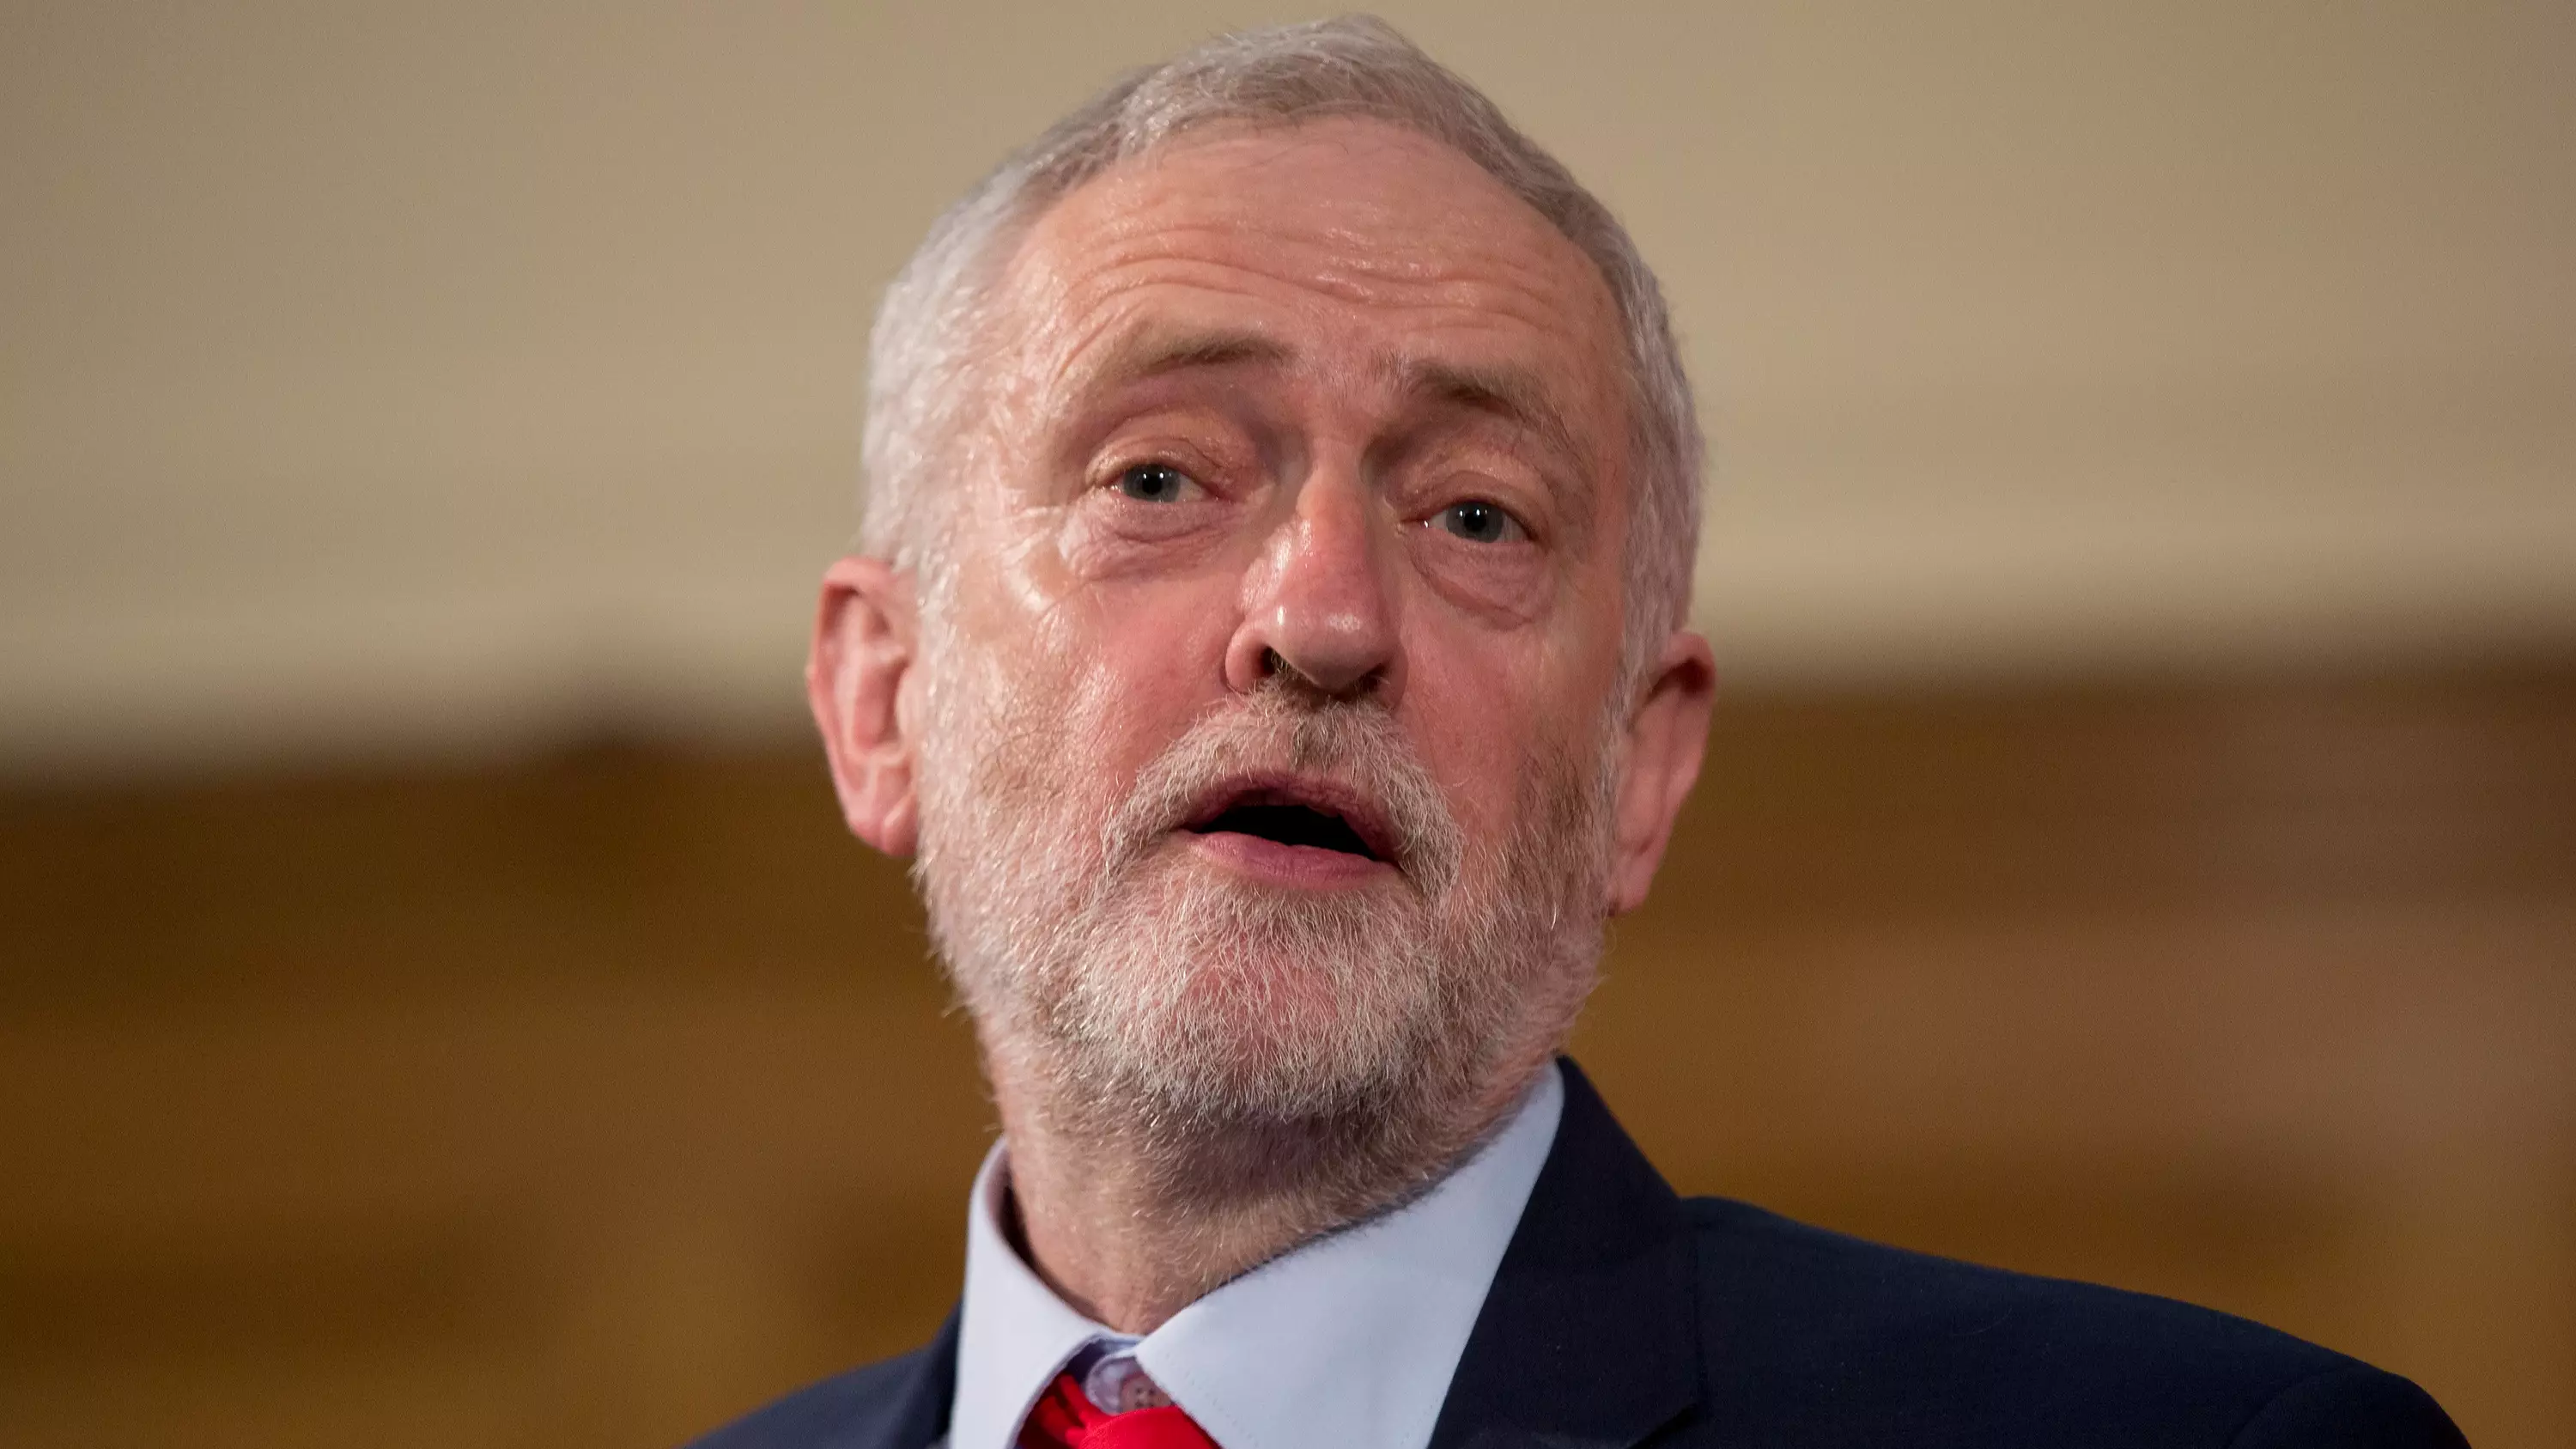 Jeremy Corbyn Will Make Four New Public Holidays If Elected 